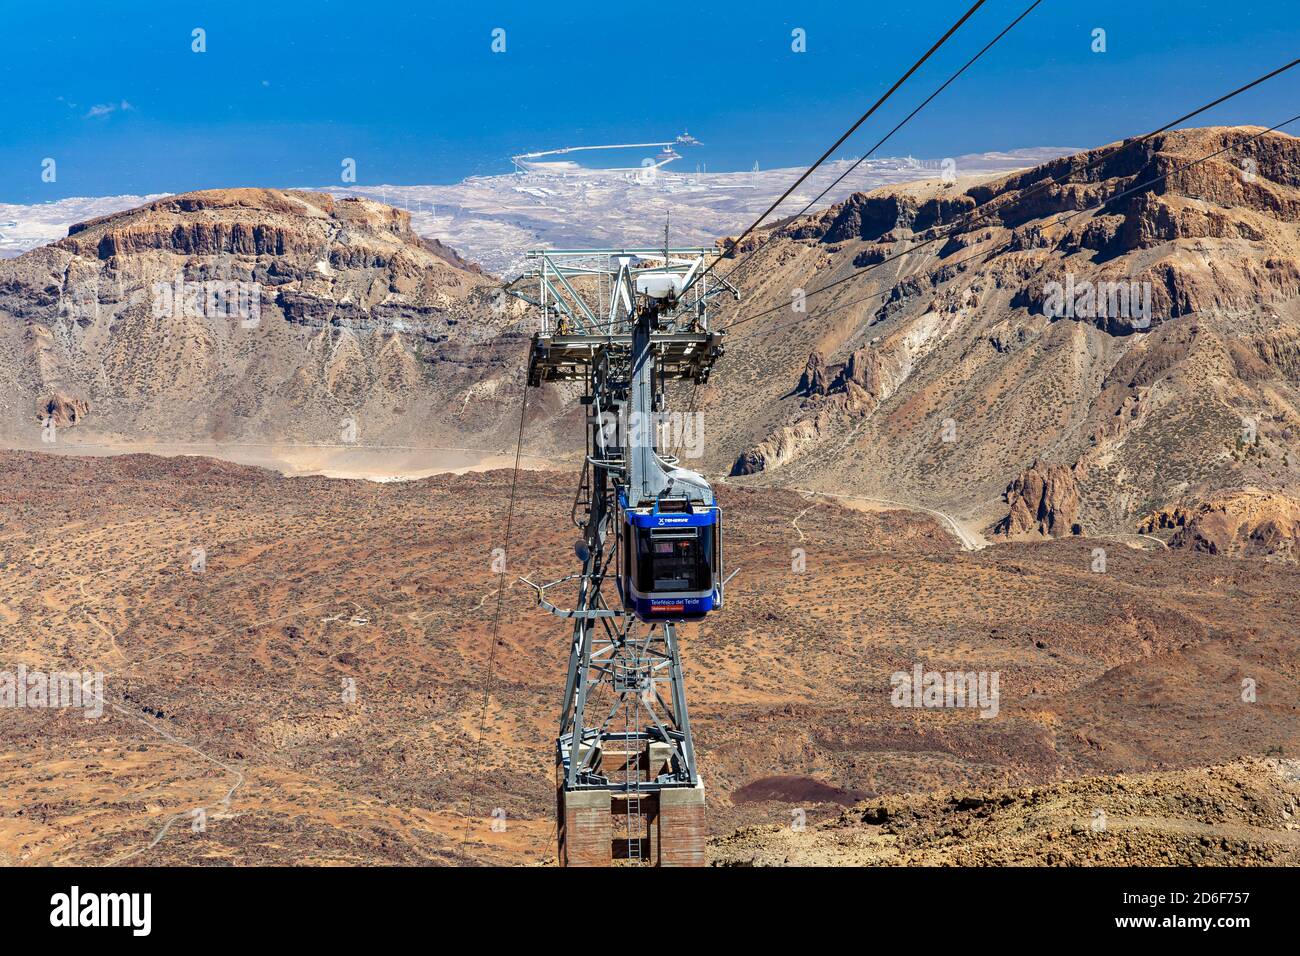 View from the summit of the Teide volcano (3,555 m) to the arriving gondola  at the cable car mountain station, Tenerife, Spain Stock Photo - Alamy